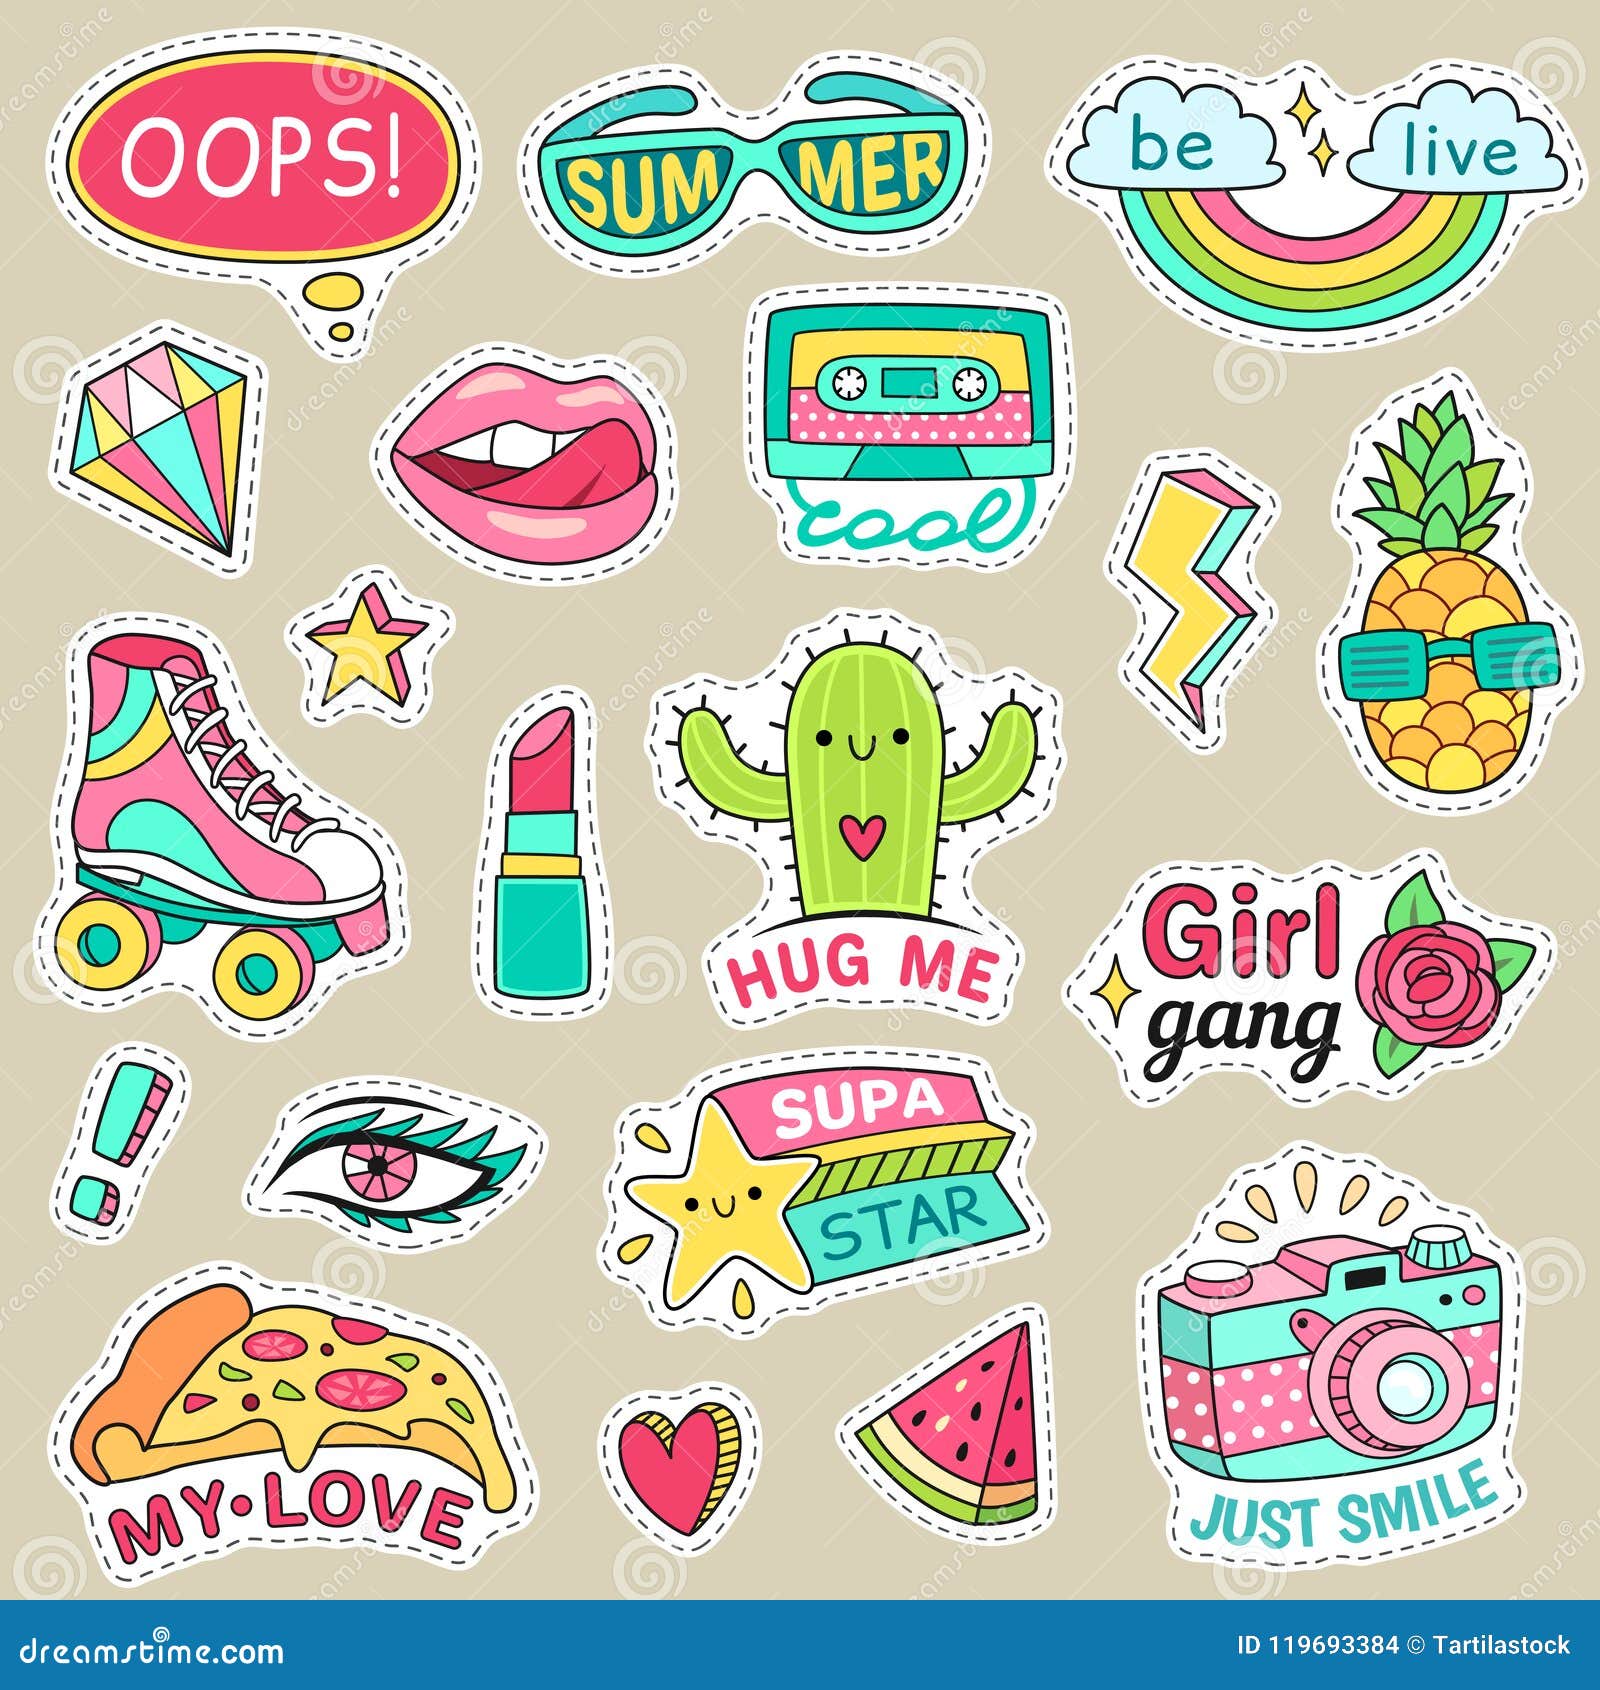 Women Waterproof Vinyl Stickers Laptop and Water Bottle Decal Sticker Pack for Teens WOWON Cute Stickers Inspirational language-50pcs Girls 